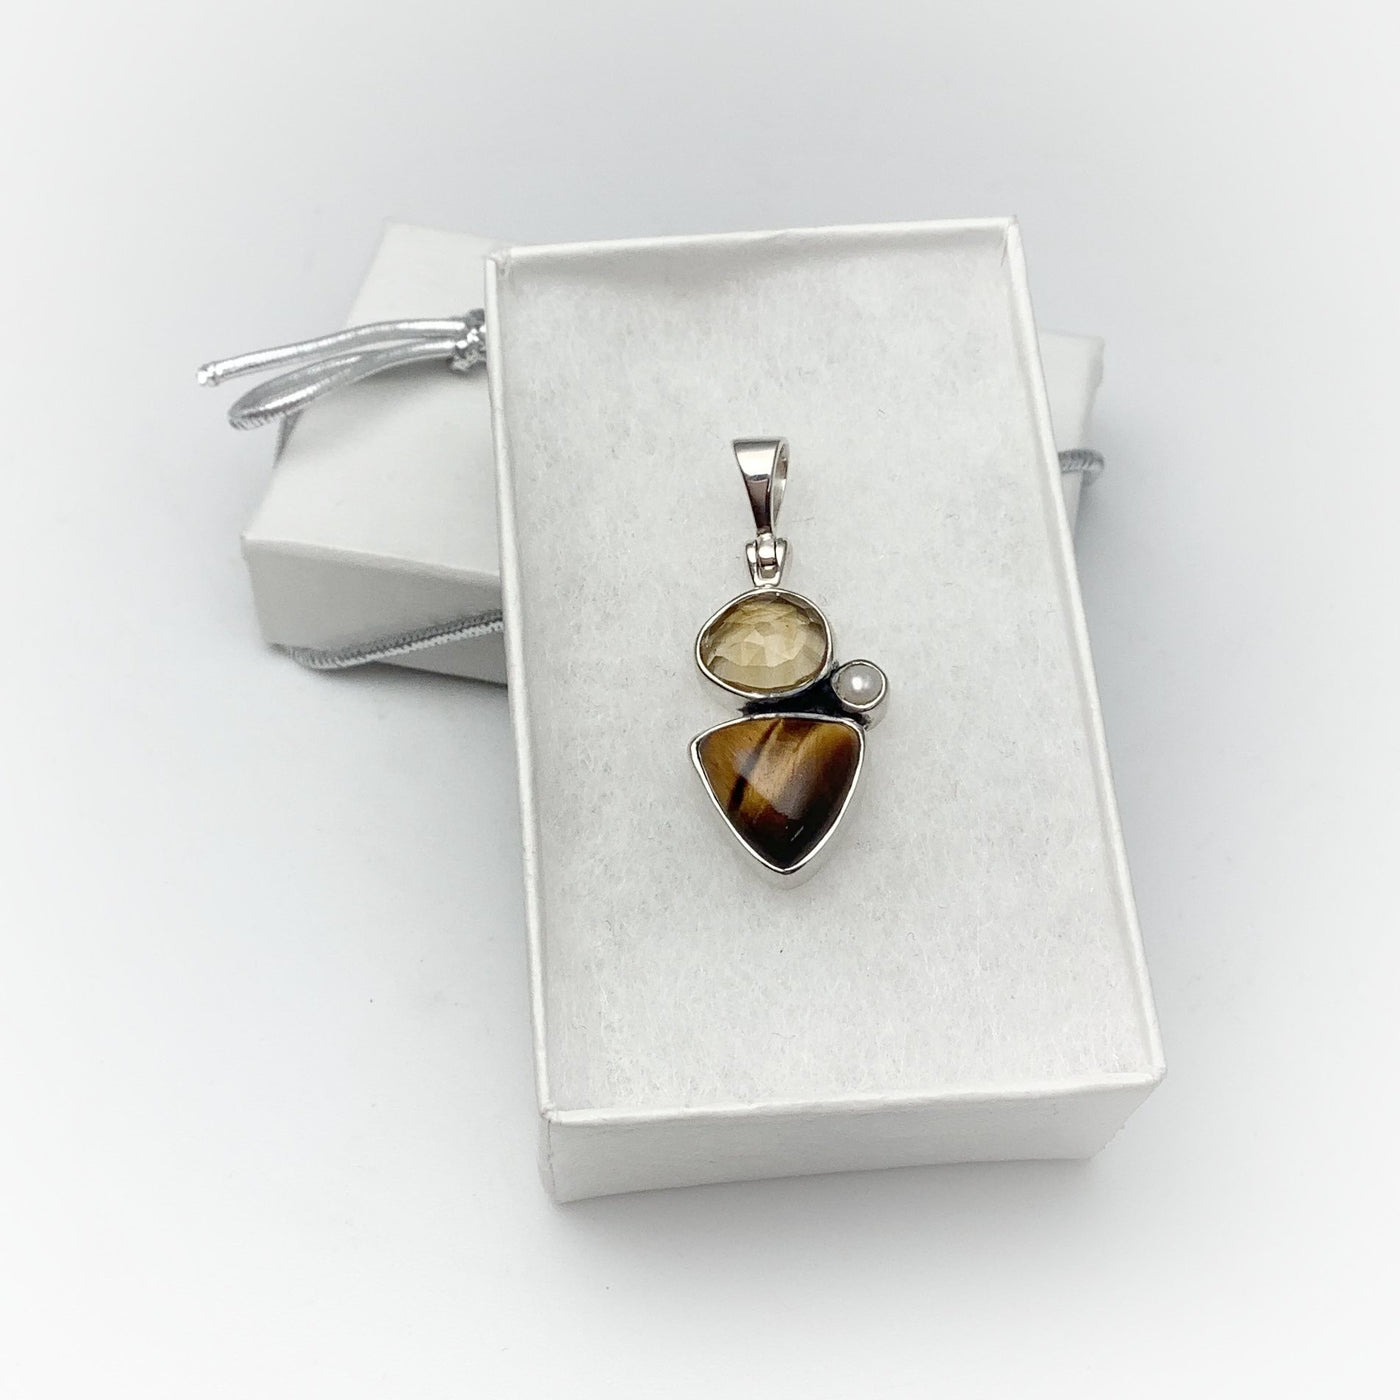 Tiger Eye, Citrine and Pearl Pendant